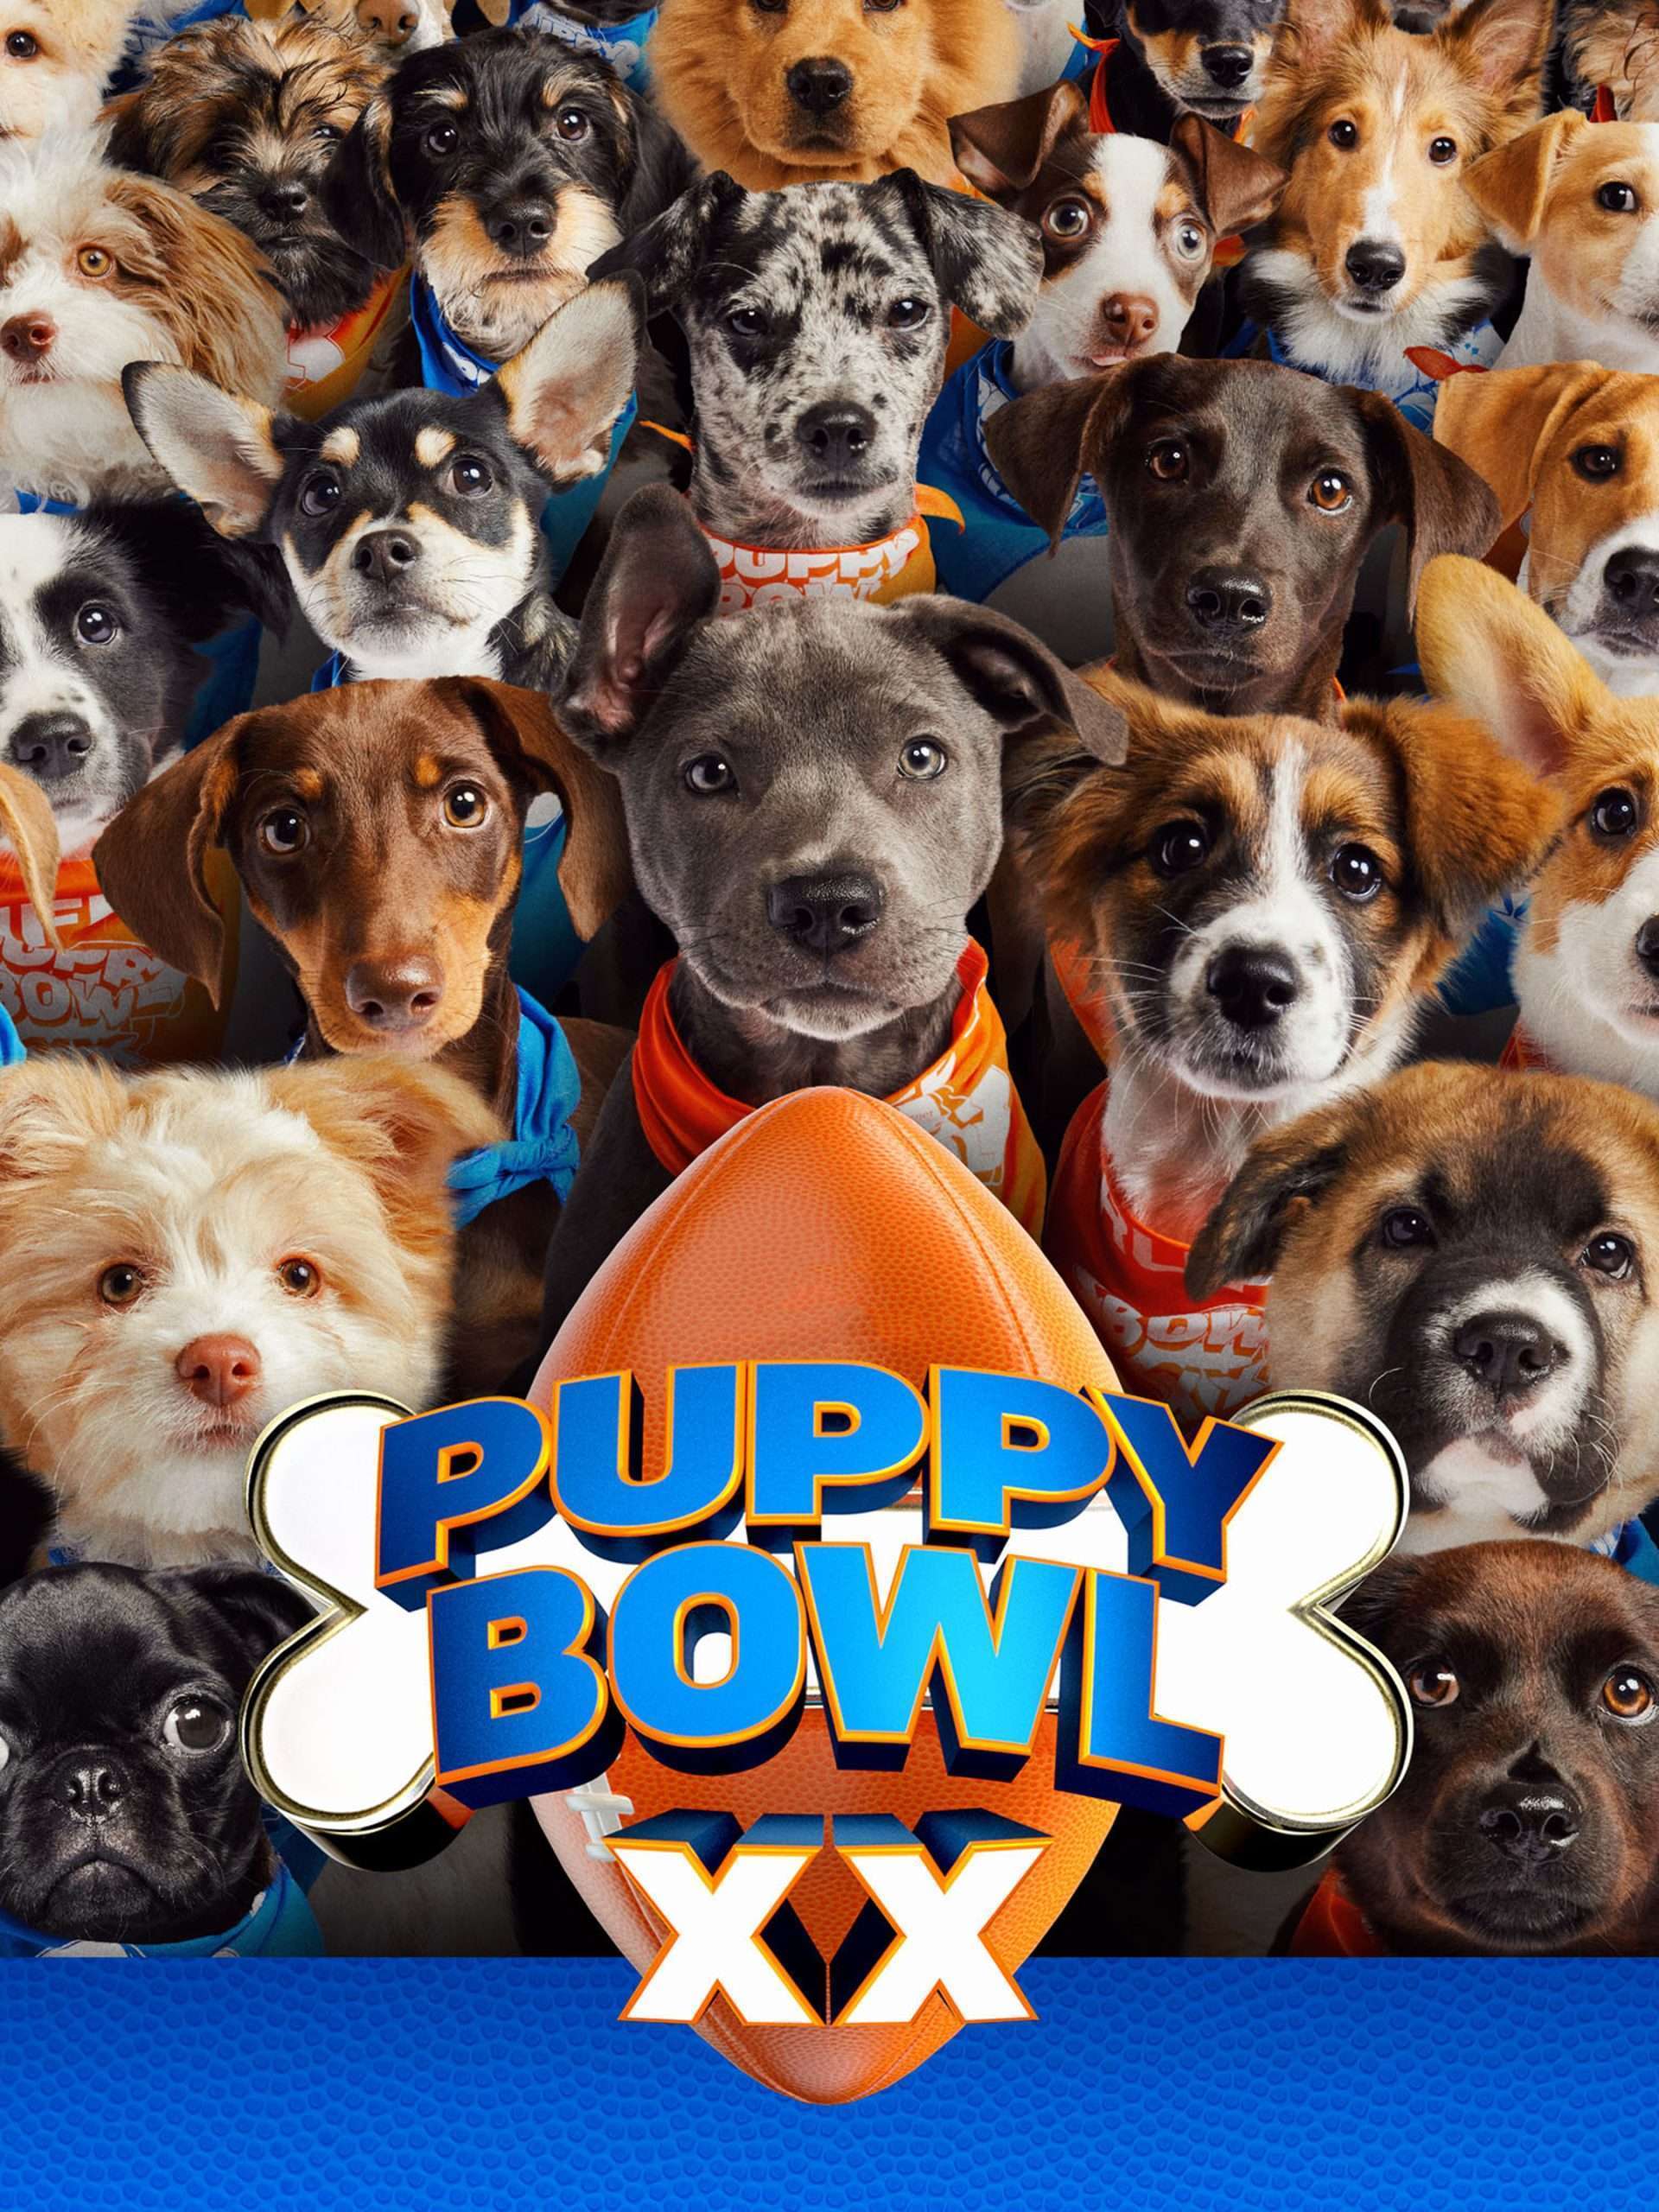 Puppy Bowl XX "Puppy Bowl Presents 20 Years of Puppies" February 3